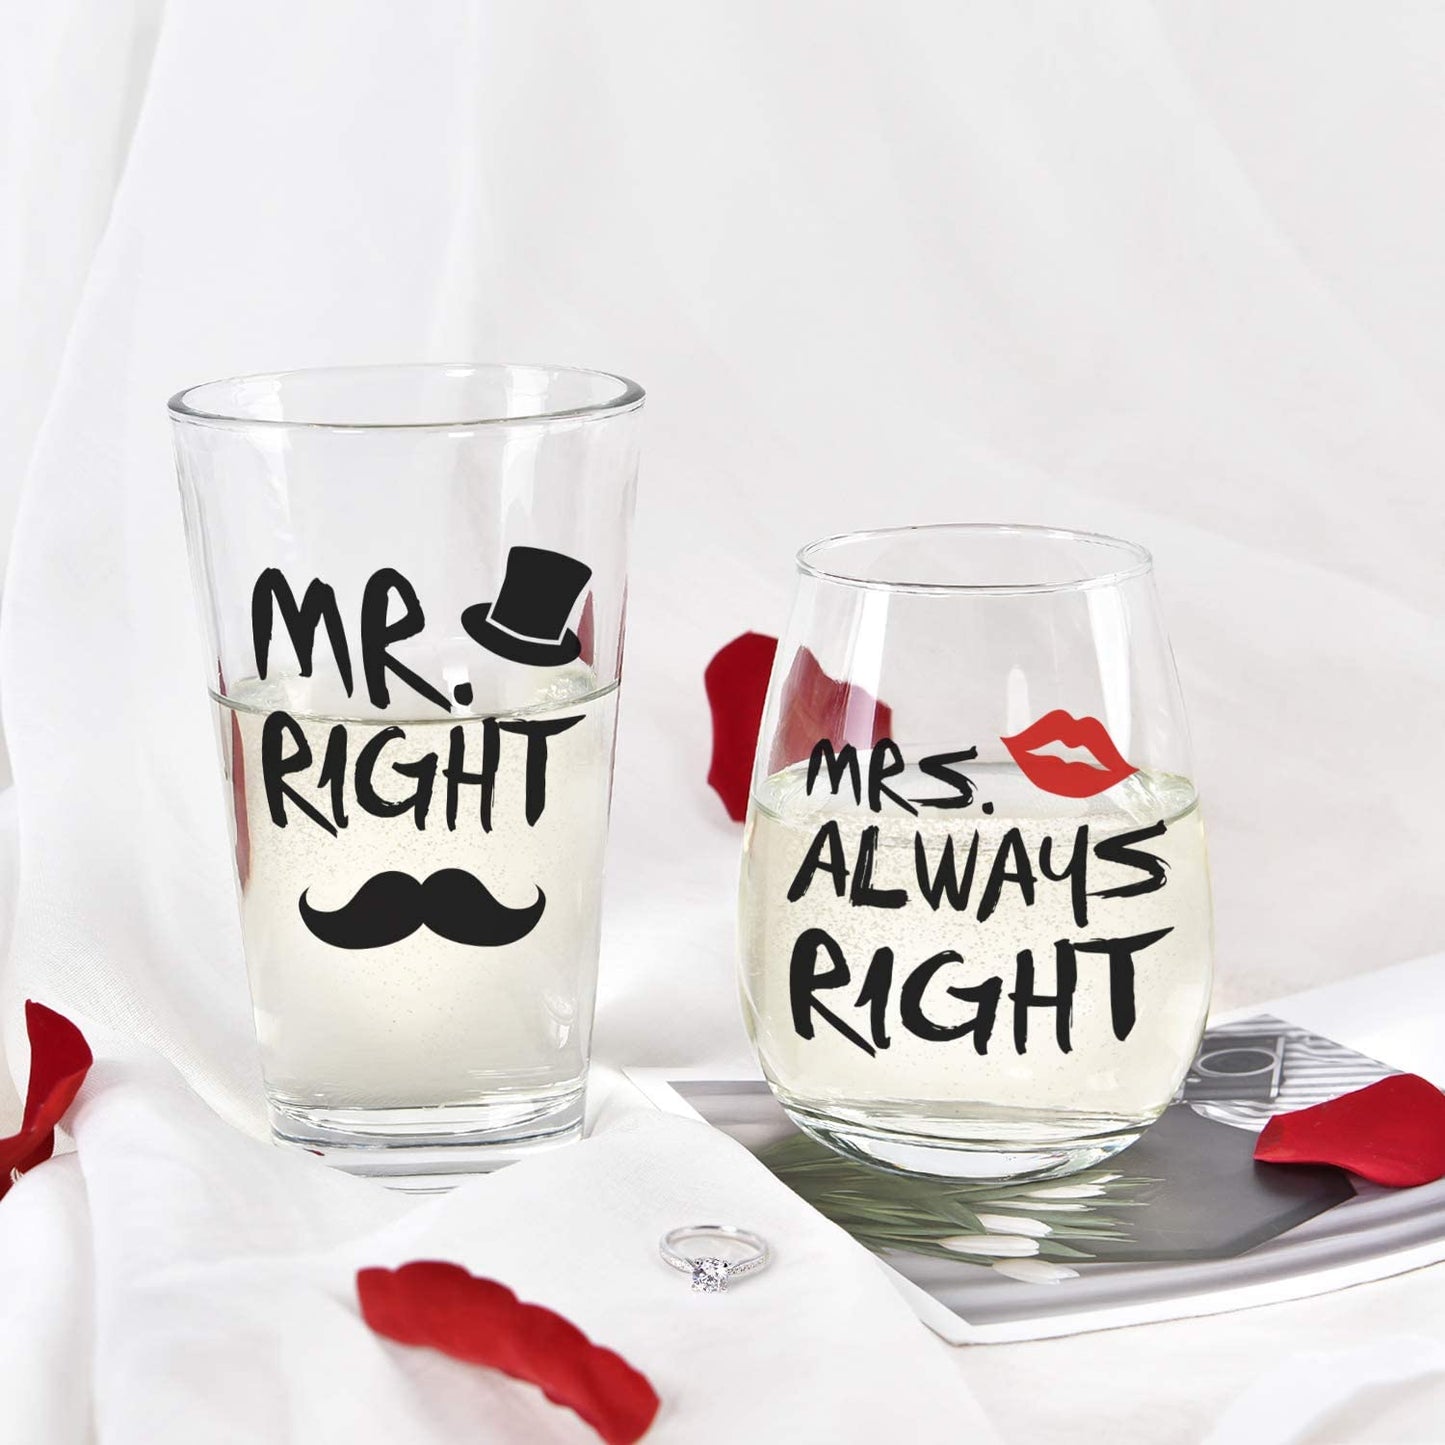 A pair of Mr and Mrs Right wine and beer glasses. Each has words printed on it which say, 'Mr Right' and 'Mrs Always Right.'